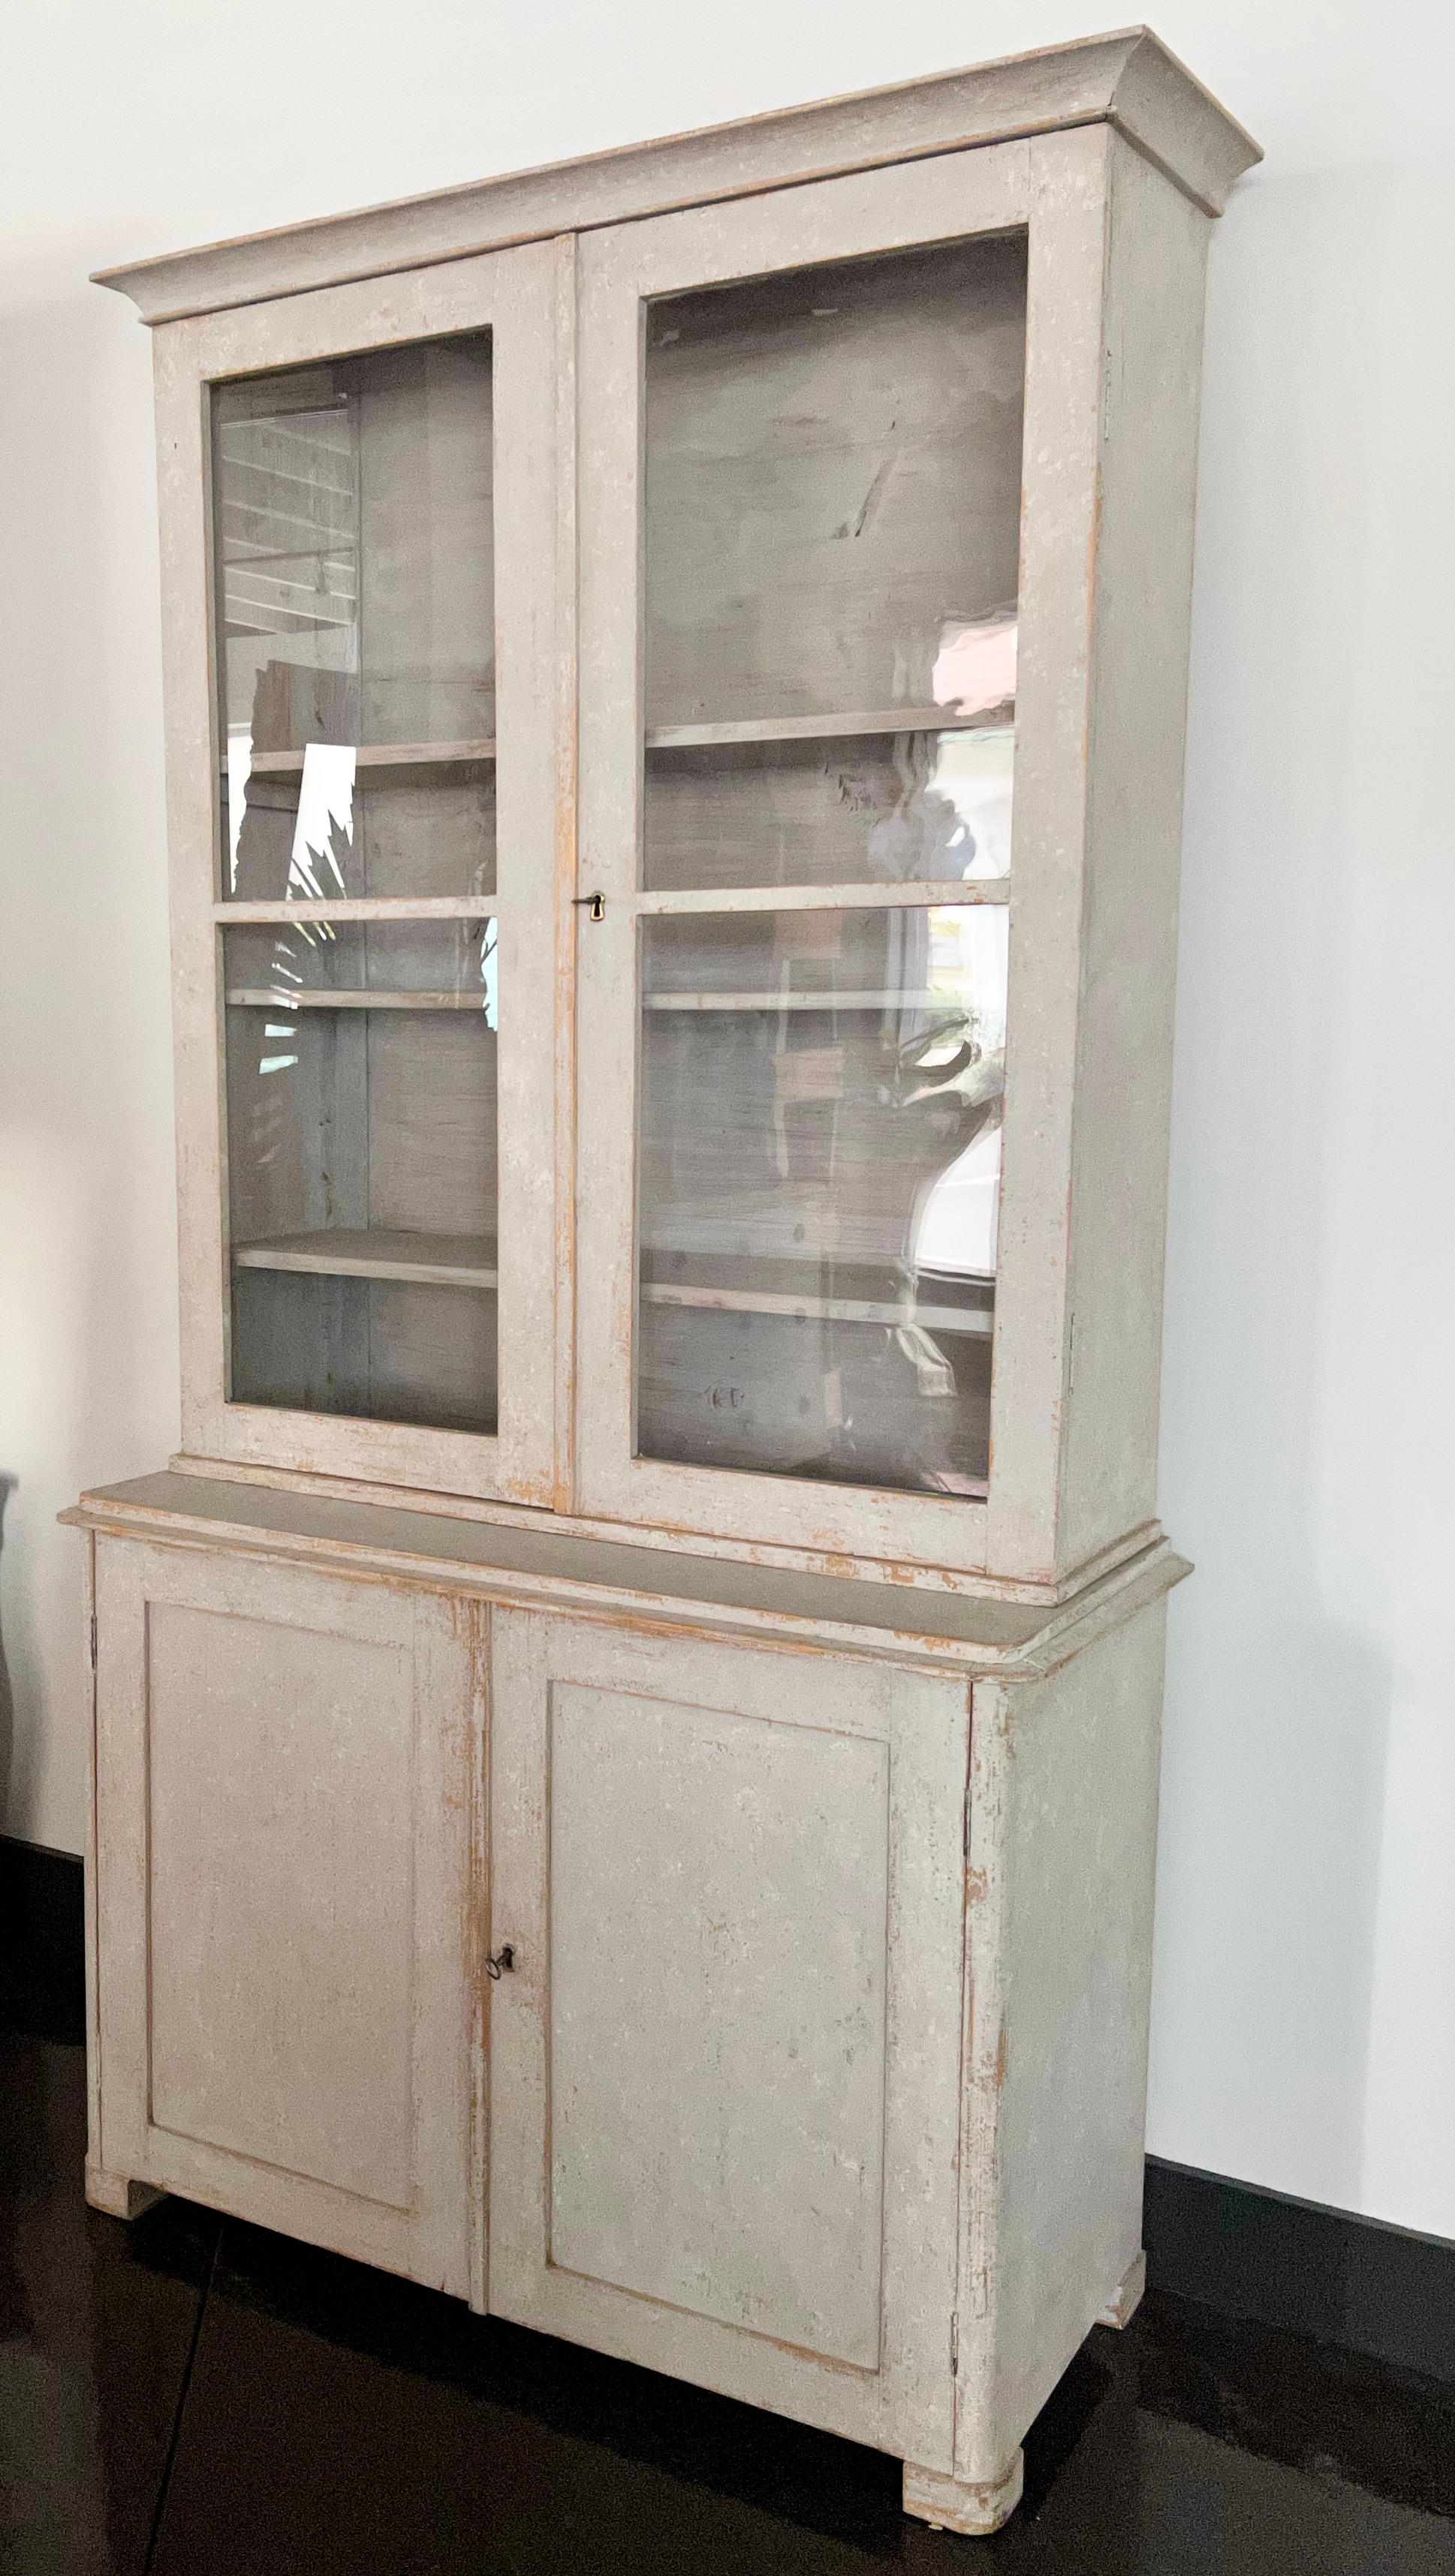 19th century Swedish bookcase / vitrine cabinet in two pieces with glass fronted doors in late simple Gustavian style.
Upper library section with molded cornice, three shelves behind double glass doors.
The lower cabinet with molded door fronts,